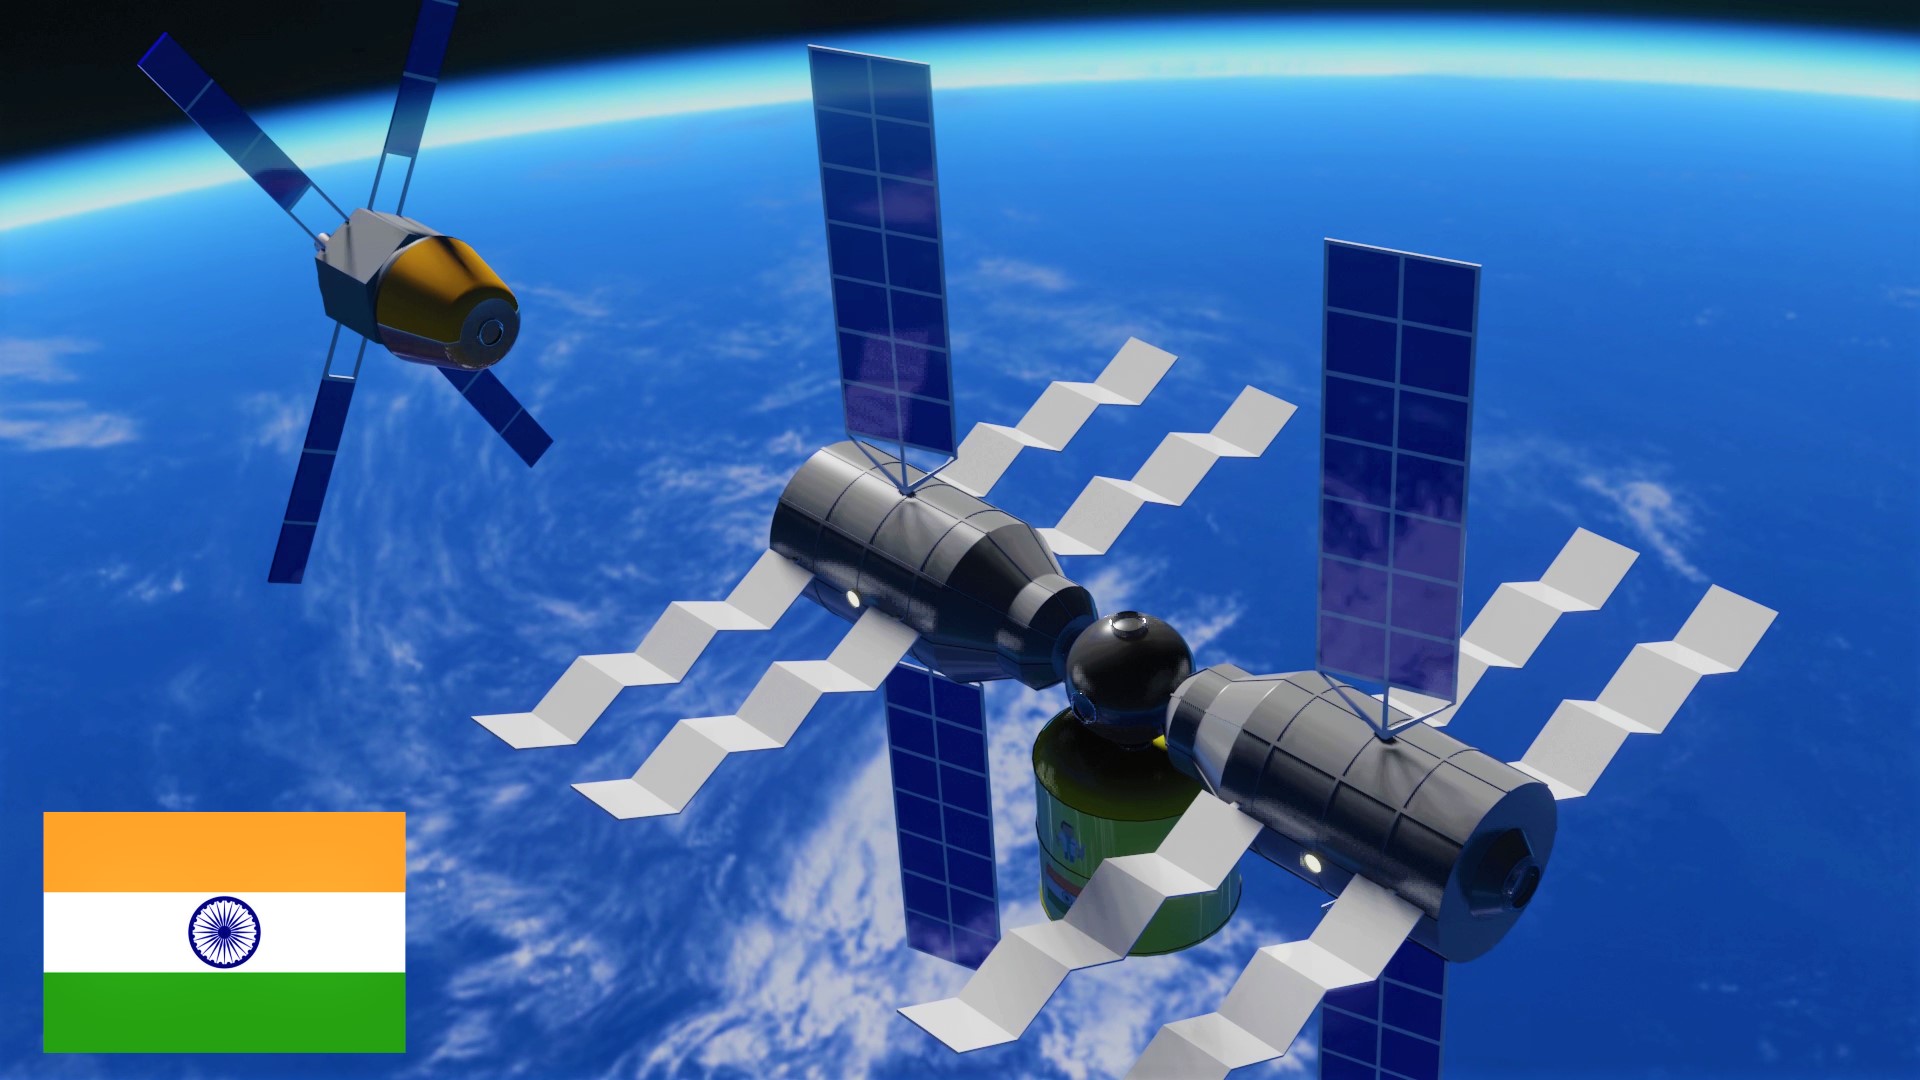 EhNV9GwUYAE5ZW9 - 4 Upcoming Space Stations That Will Change the Future of Space Travel